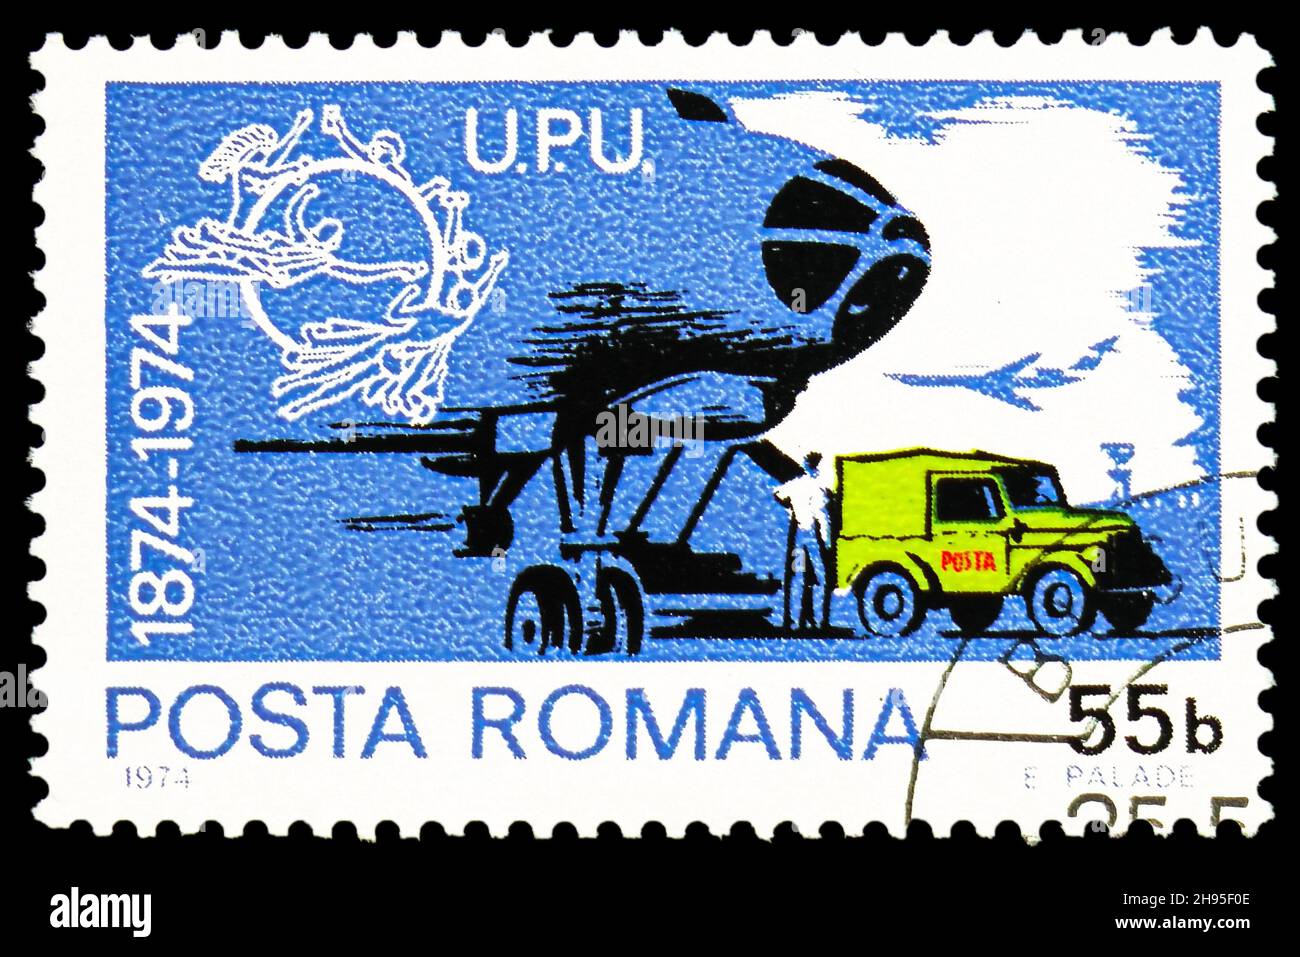 MOSCOW, RUSSIA - OCTOBER 24, 2021: Postage stamp printed in Romania shows Mailplane and truck, U.P.U. (Universal Postal Union), Centenary serie, circa Stock Photo